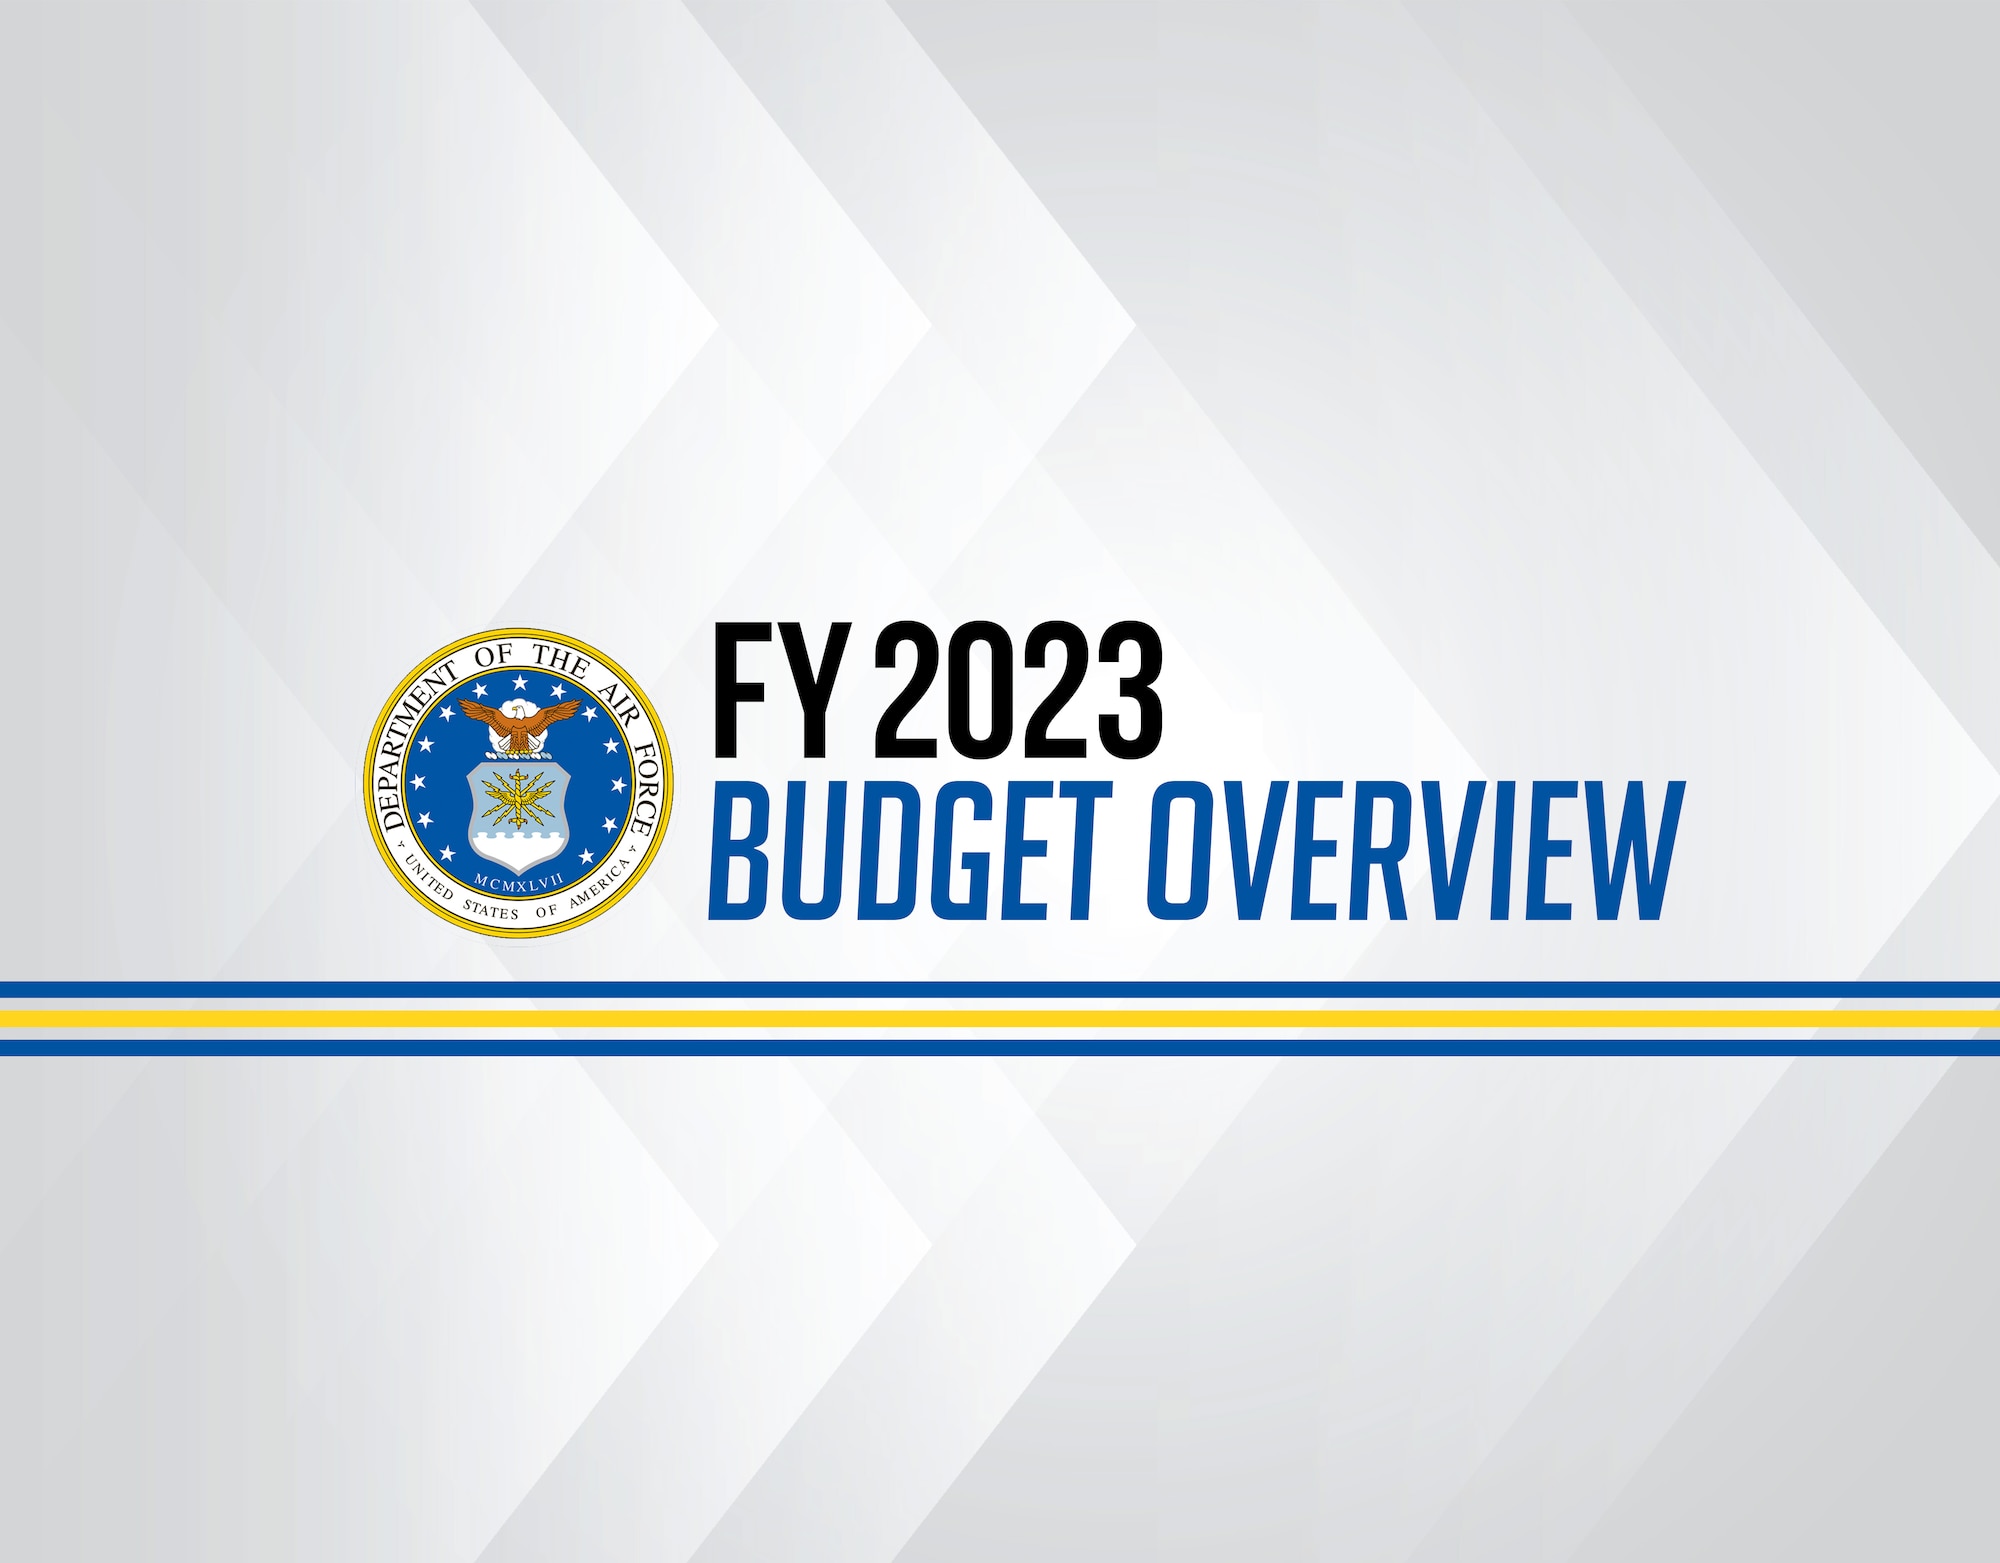 Department of the Air Force budget proposal focuses on transformation